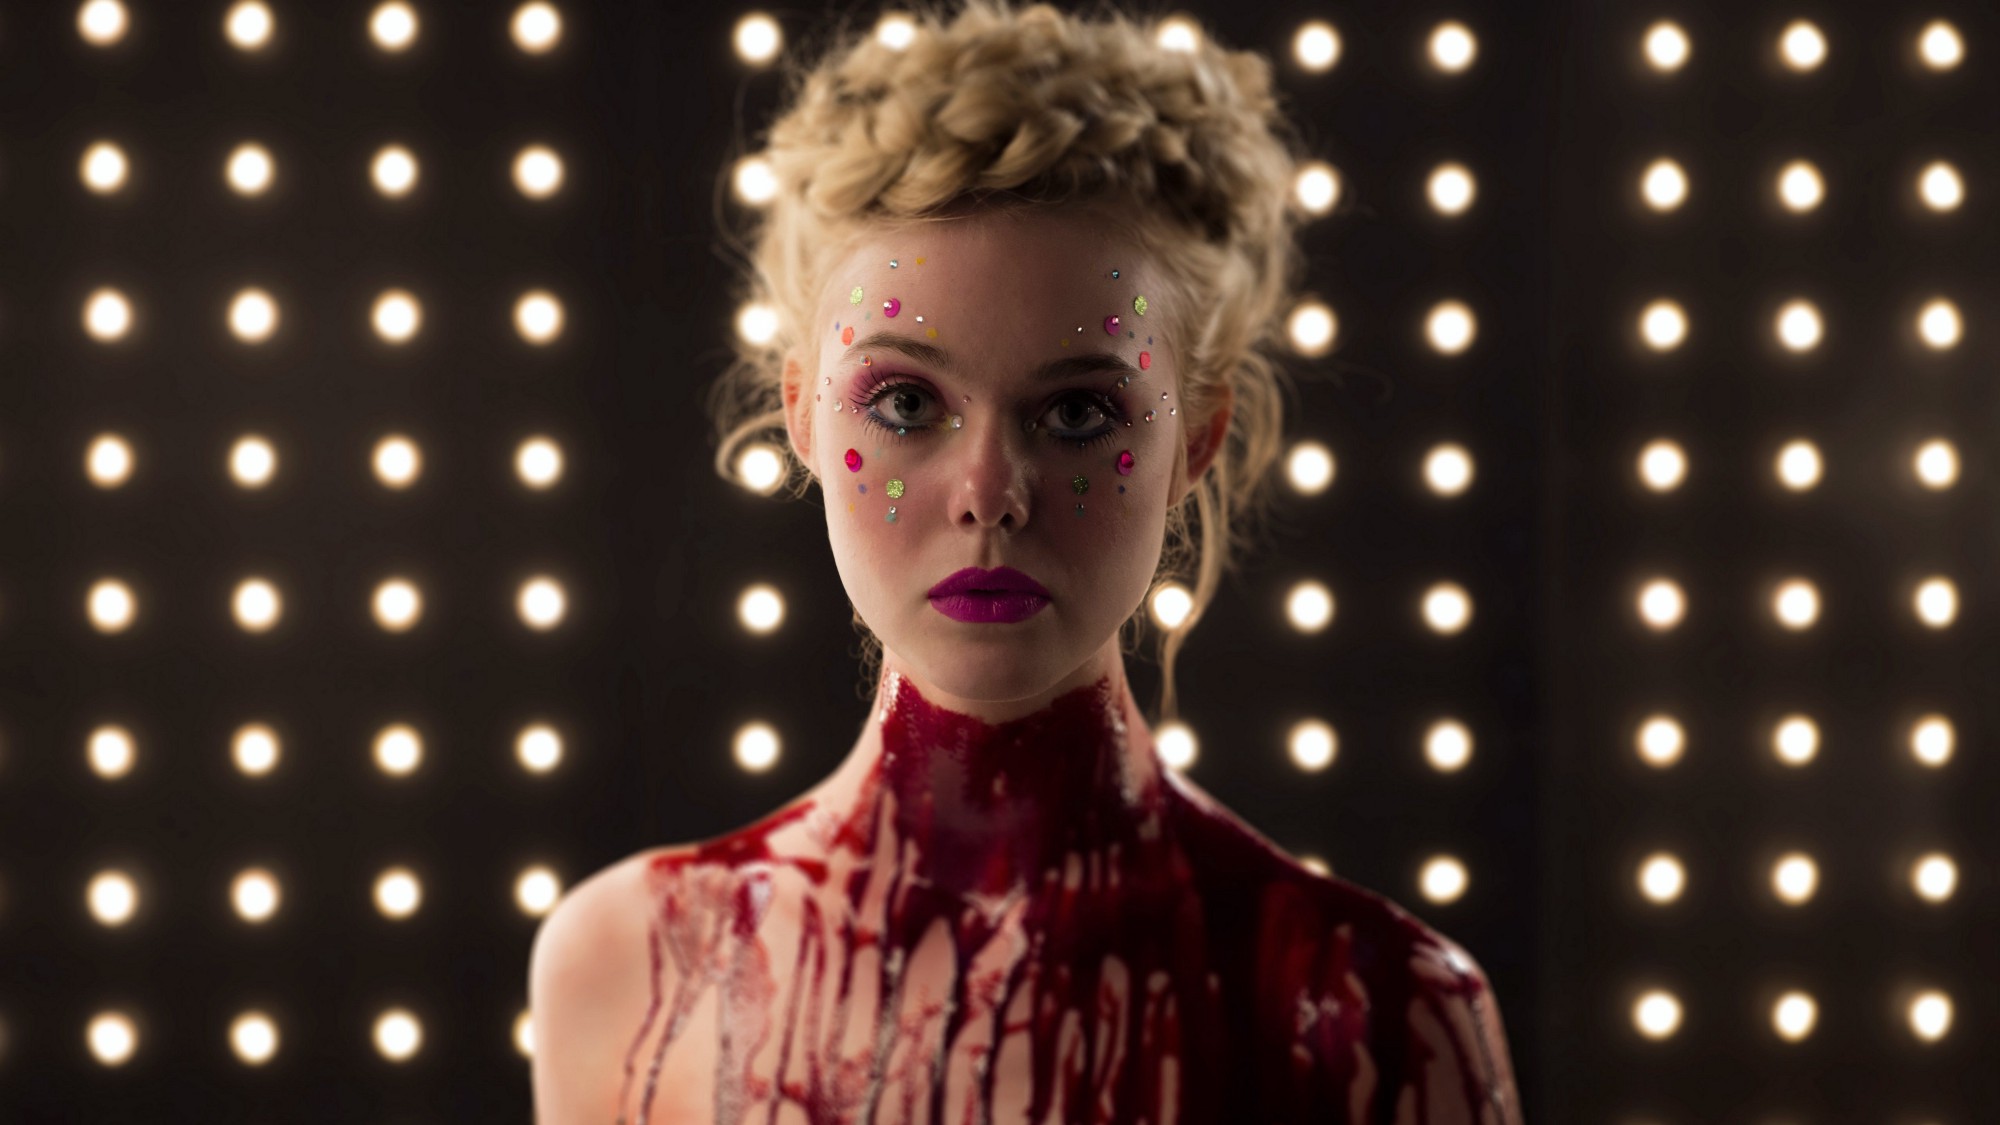 HQ The Neon Demon Wallpapers | File 240.82Kb